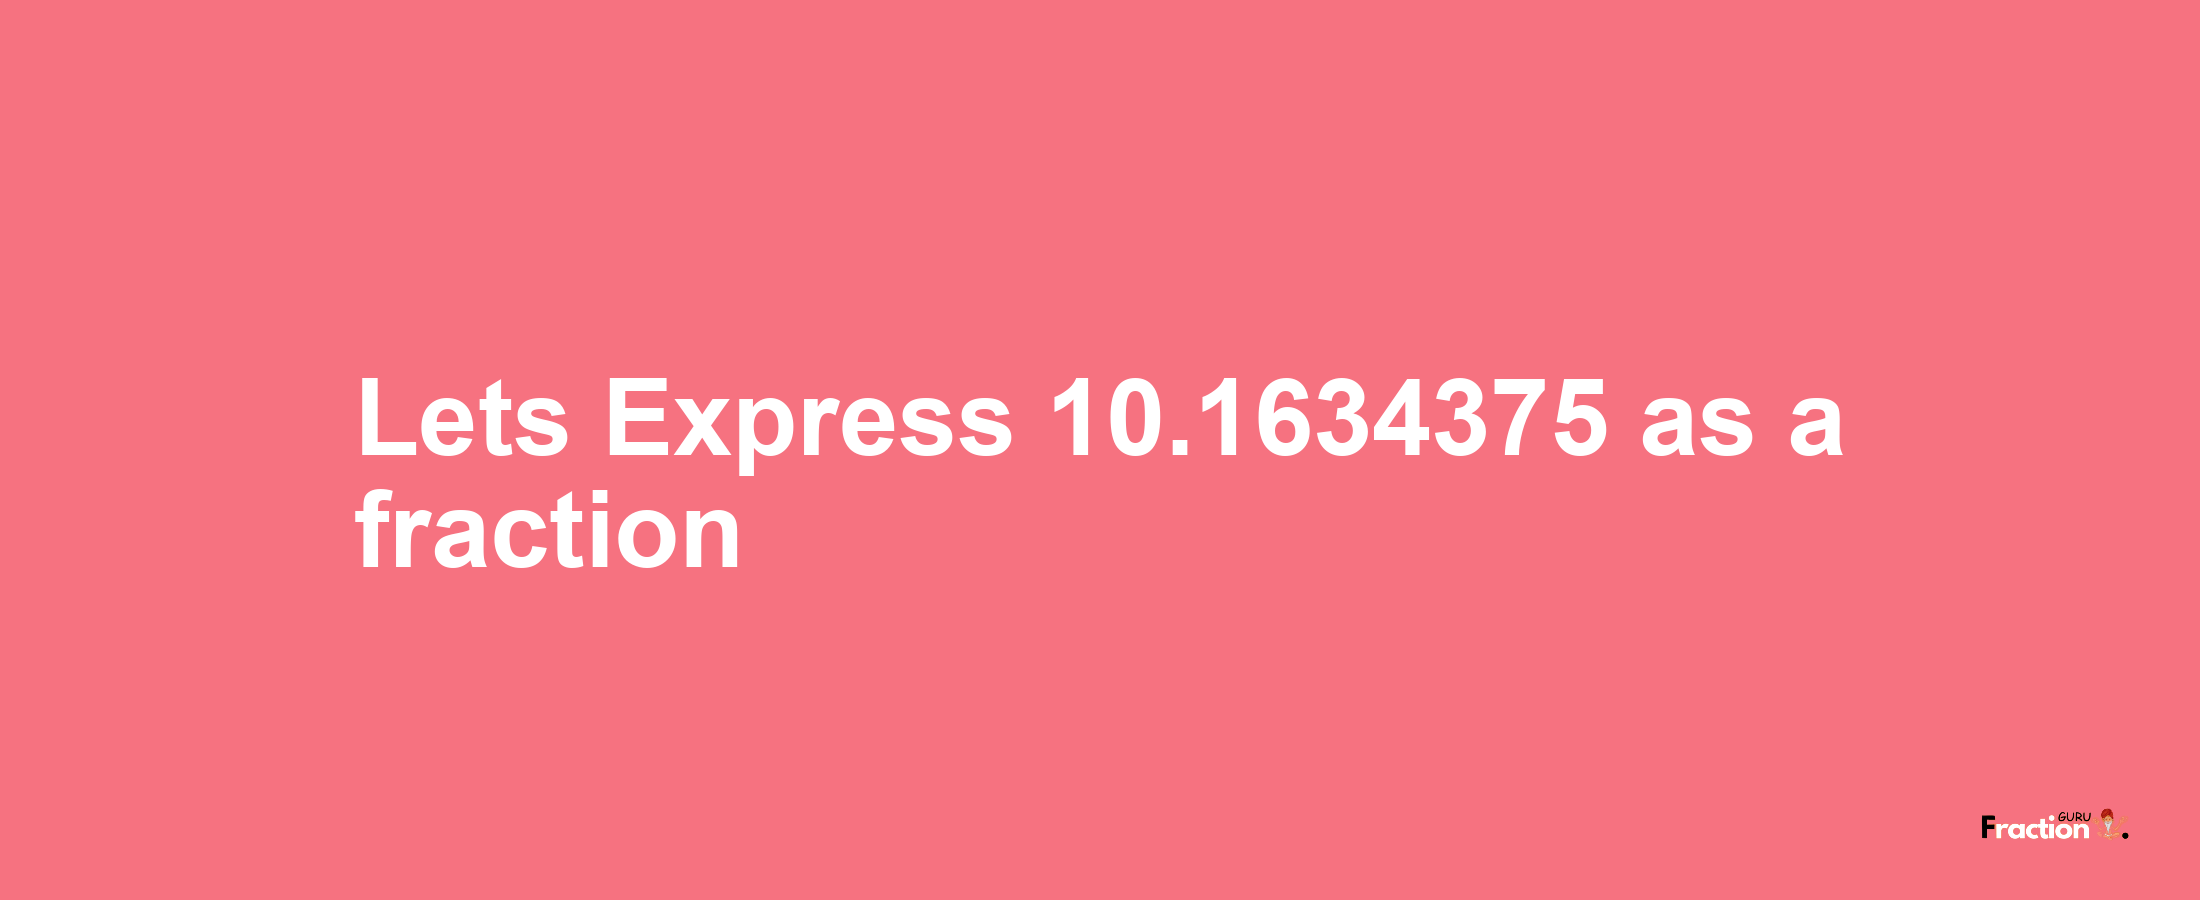 Lets Express 10.1634375 as afraction